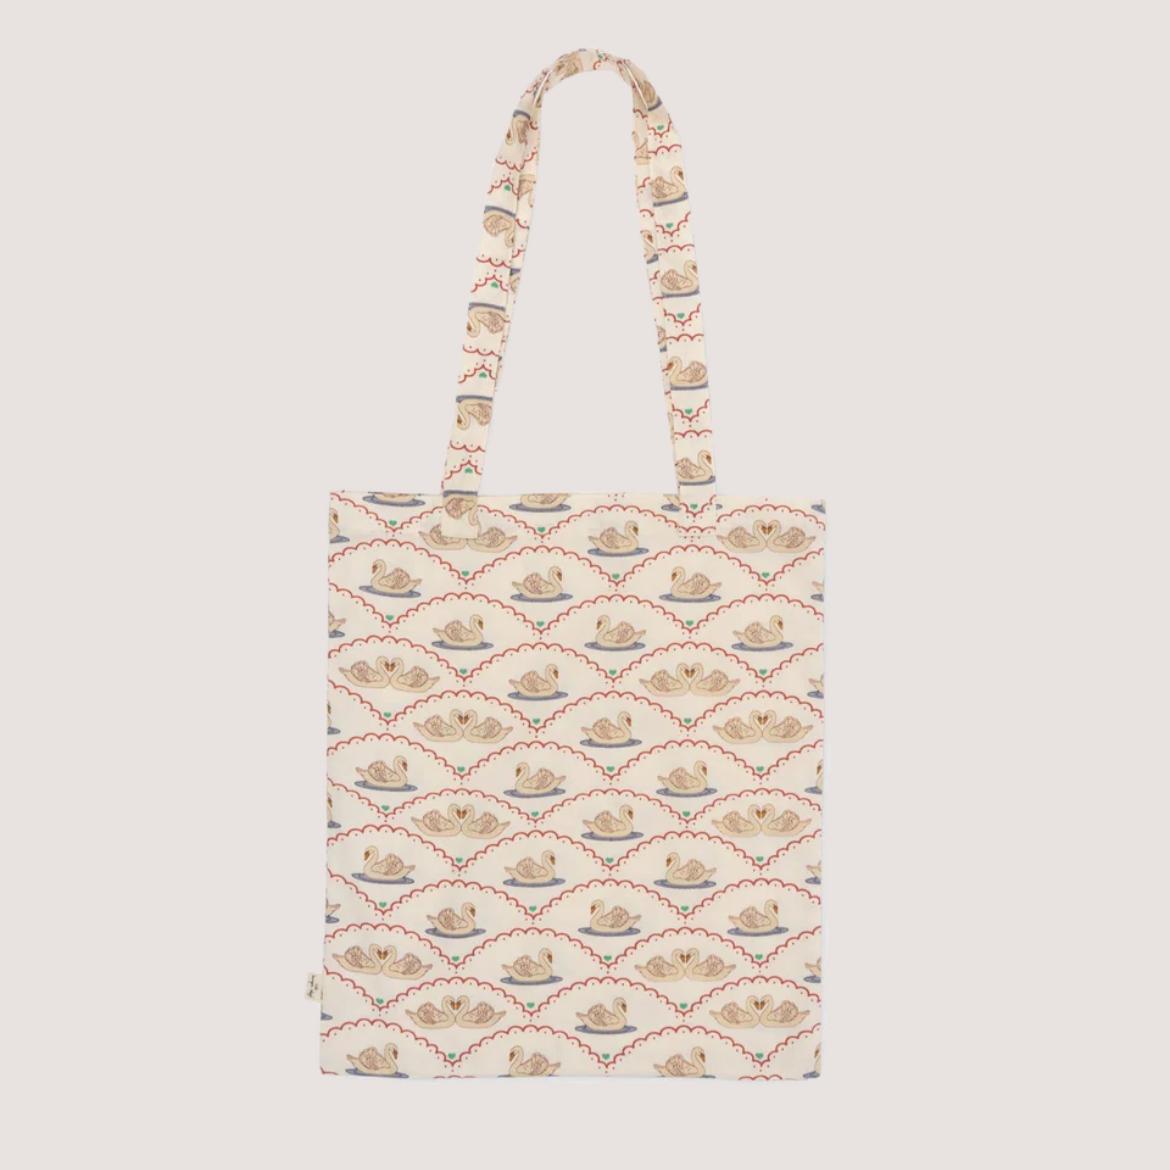 TOTE BAGS SWAN NEW ARRIVALS